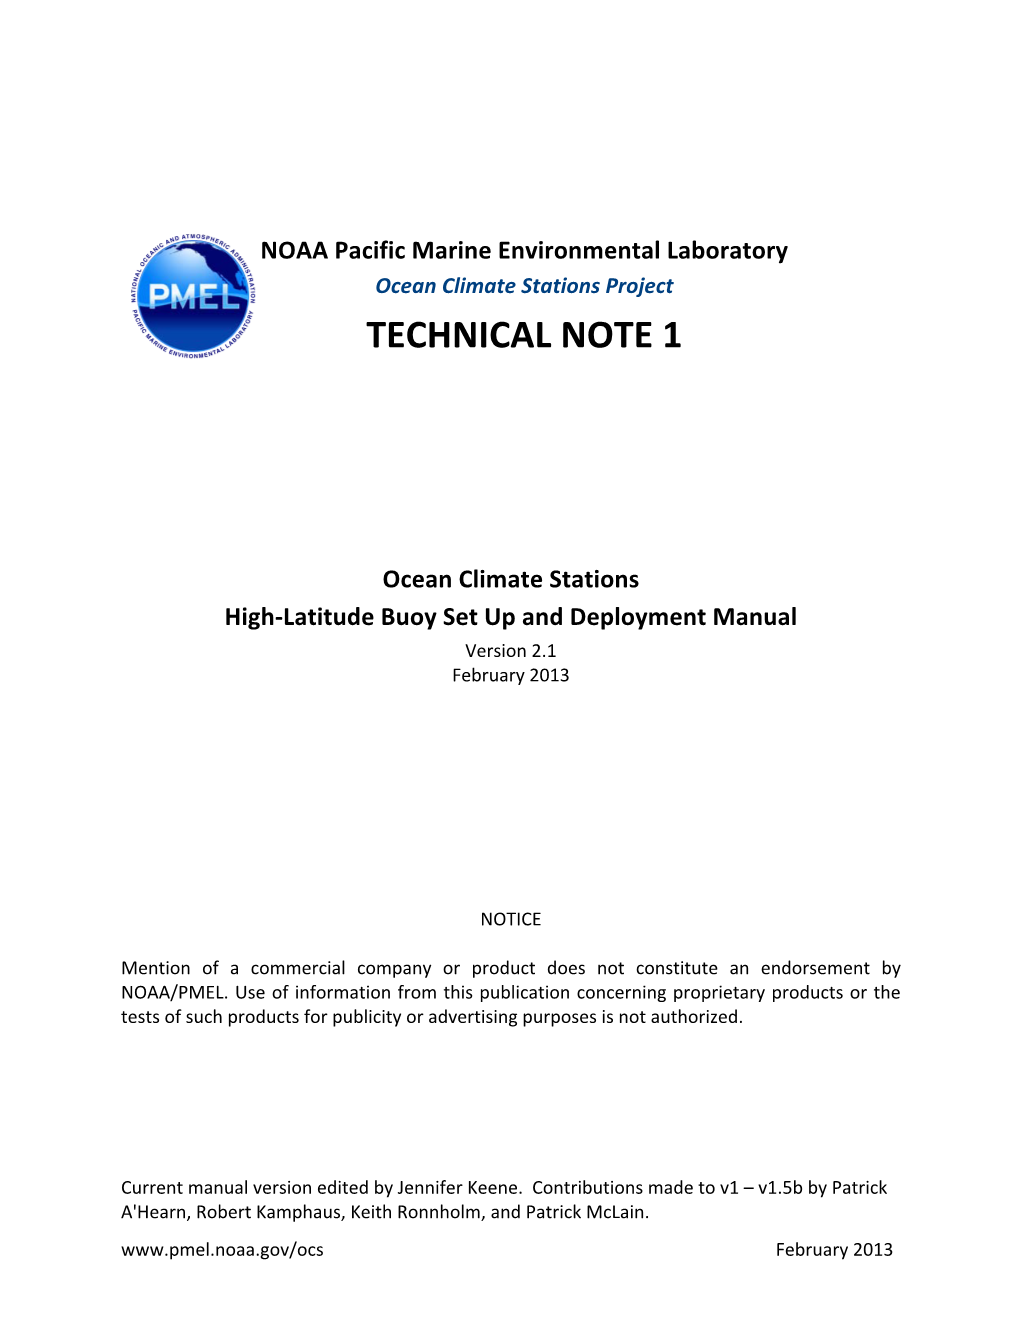 Technical Note 1